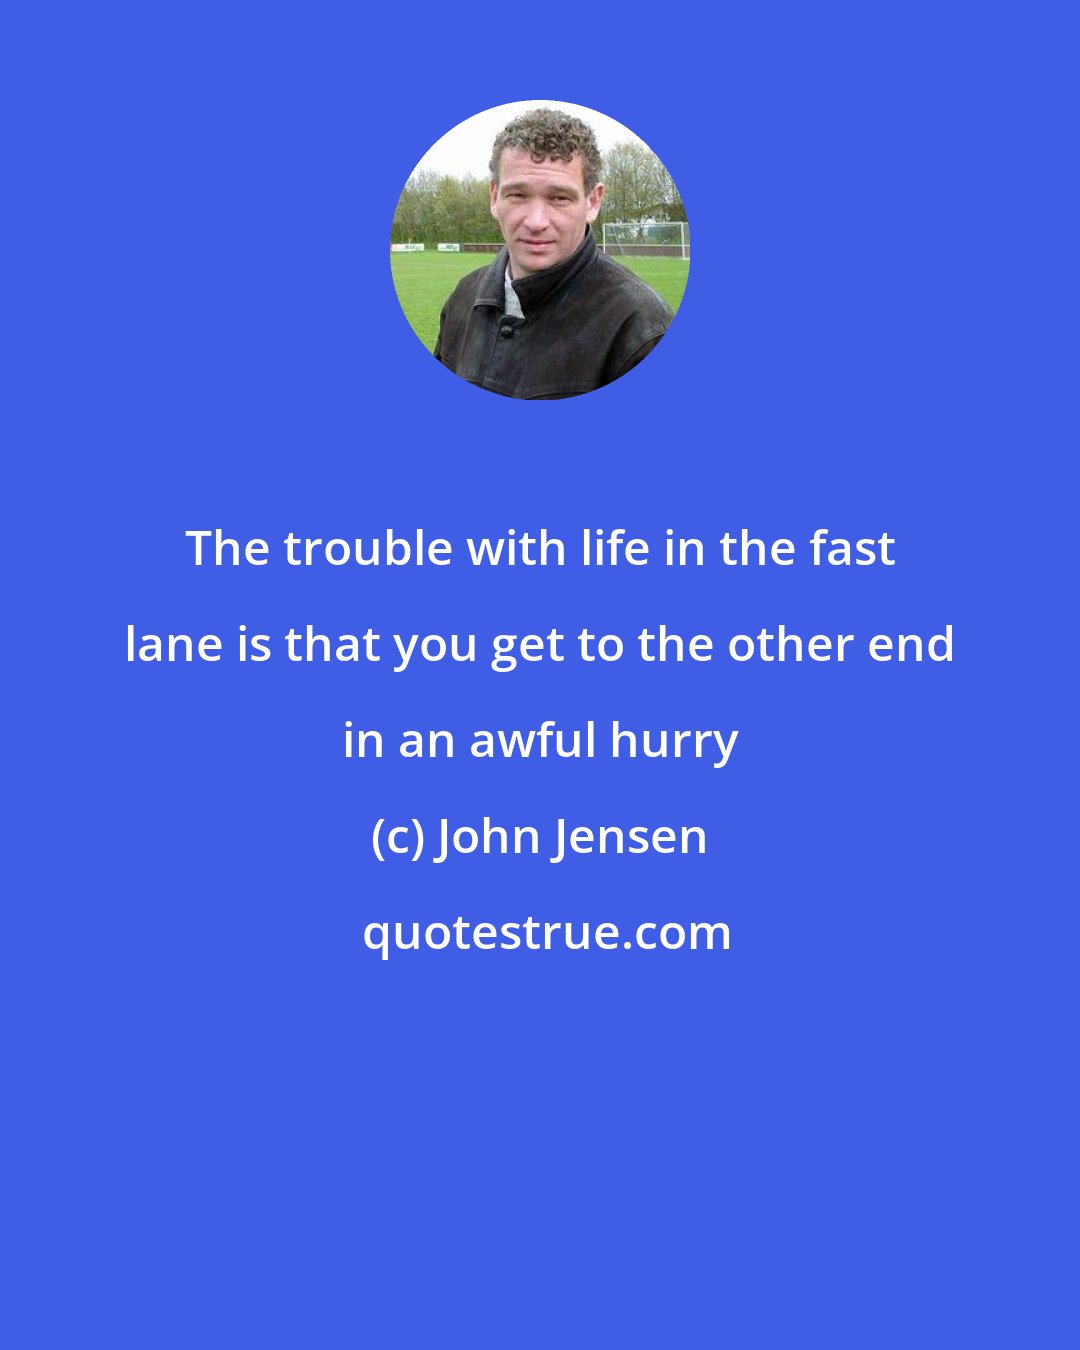 John Jensen: The trouble with life in the fast lane is that you get to the other end in an awful hurry